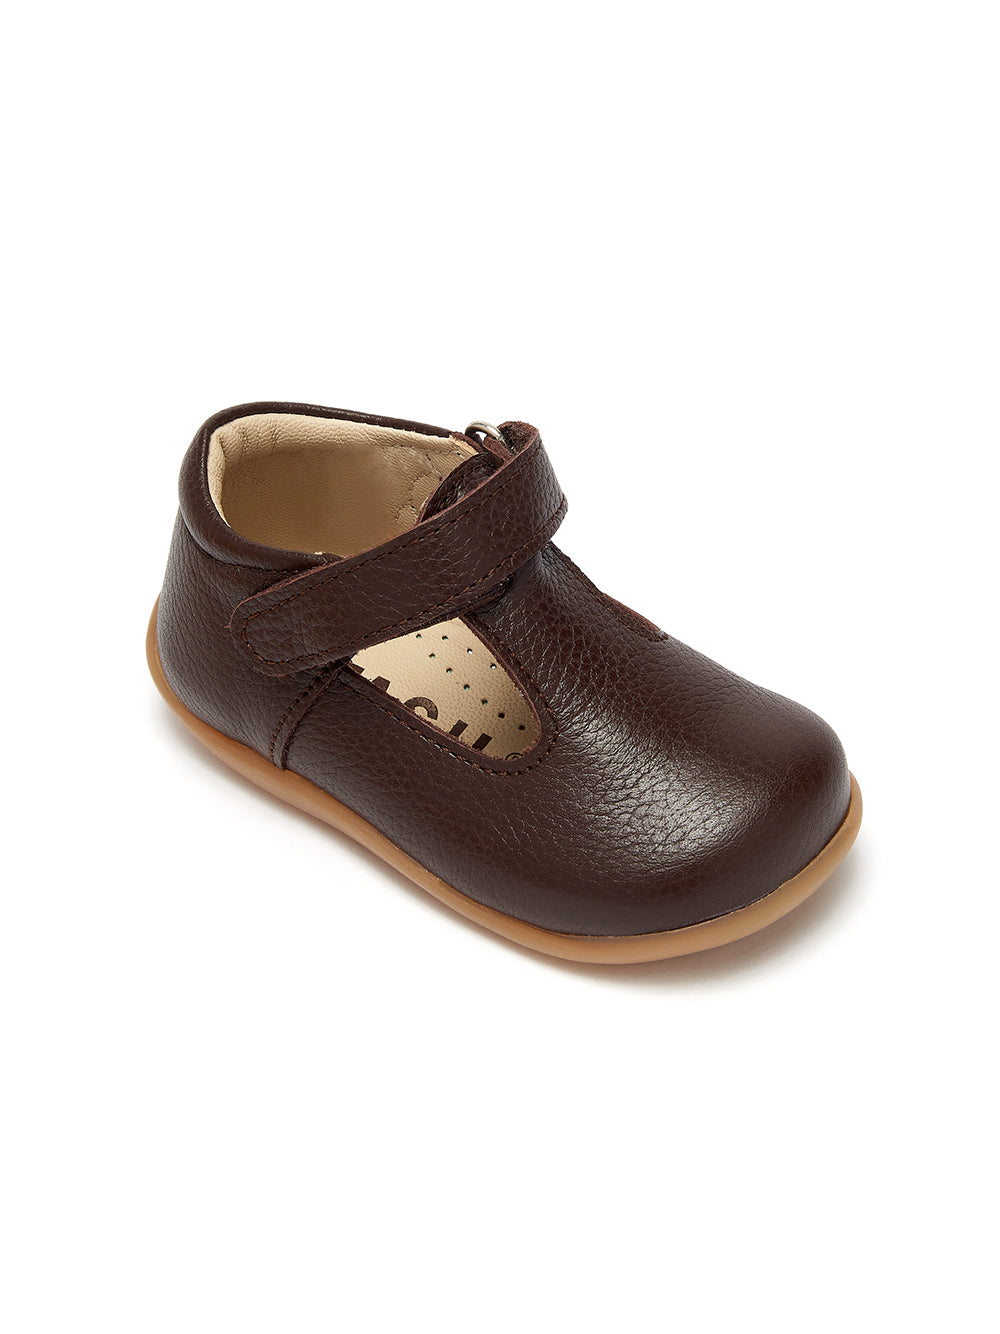 Brown Leather First Steps T-Bar Shoes